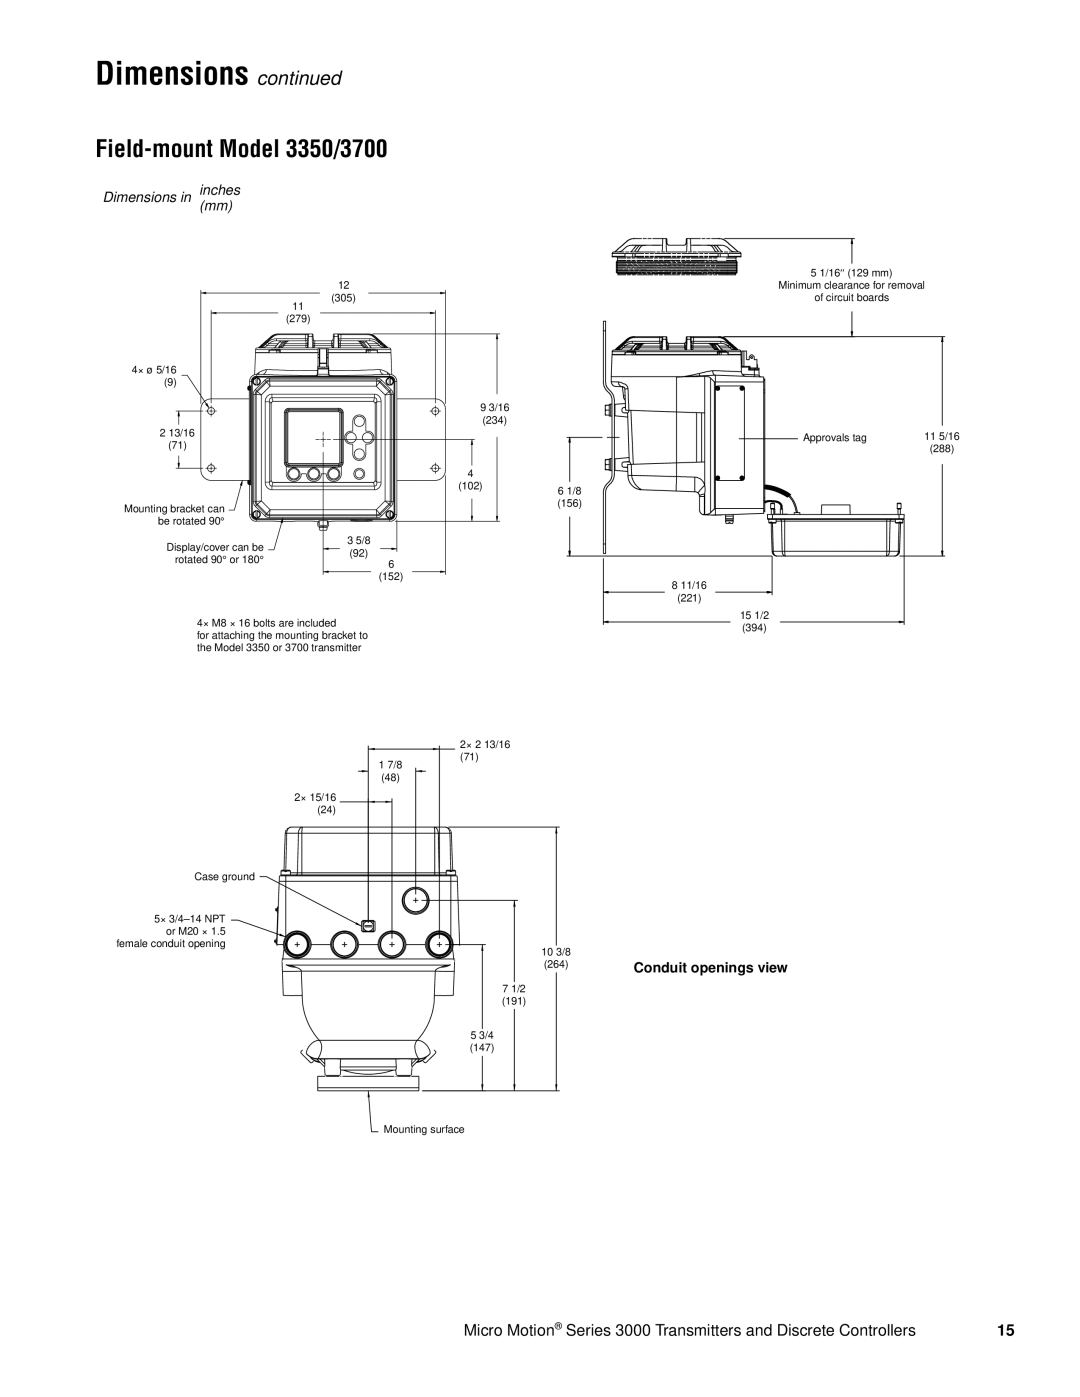 Emerson Series 3000 manual Field-mountModel 3350/3700, Dimensions continued, Dimensions in inchesmm, Conduit openings view 